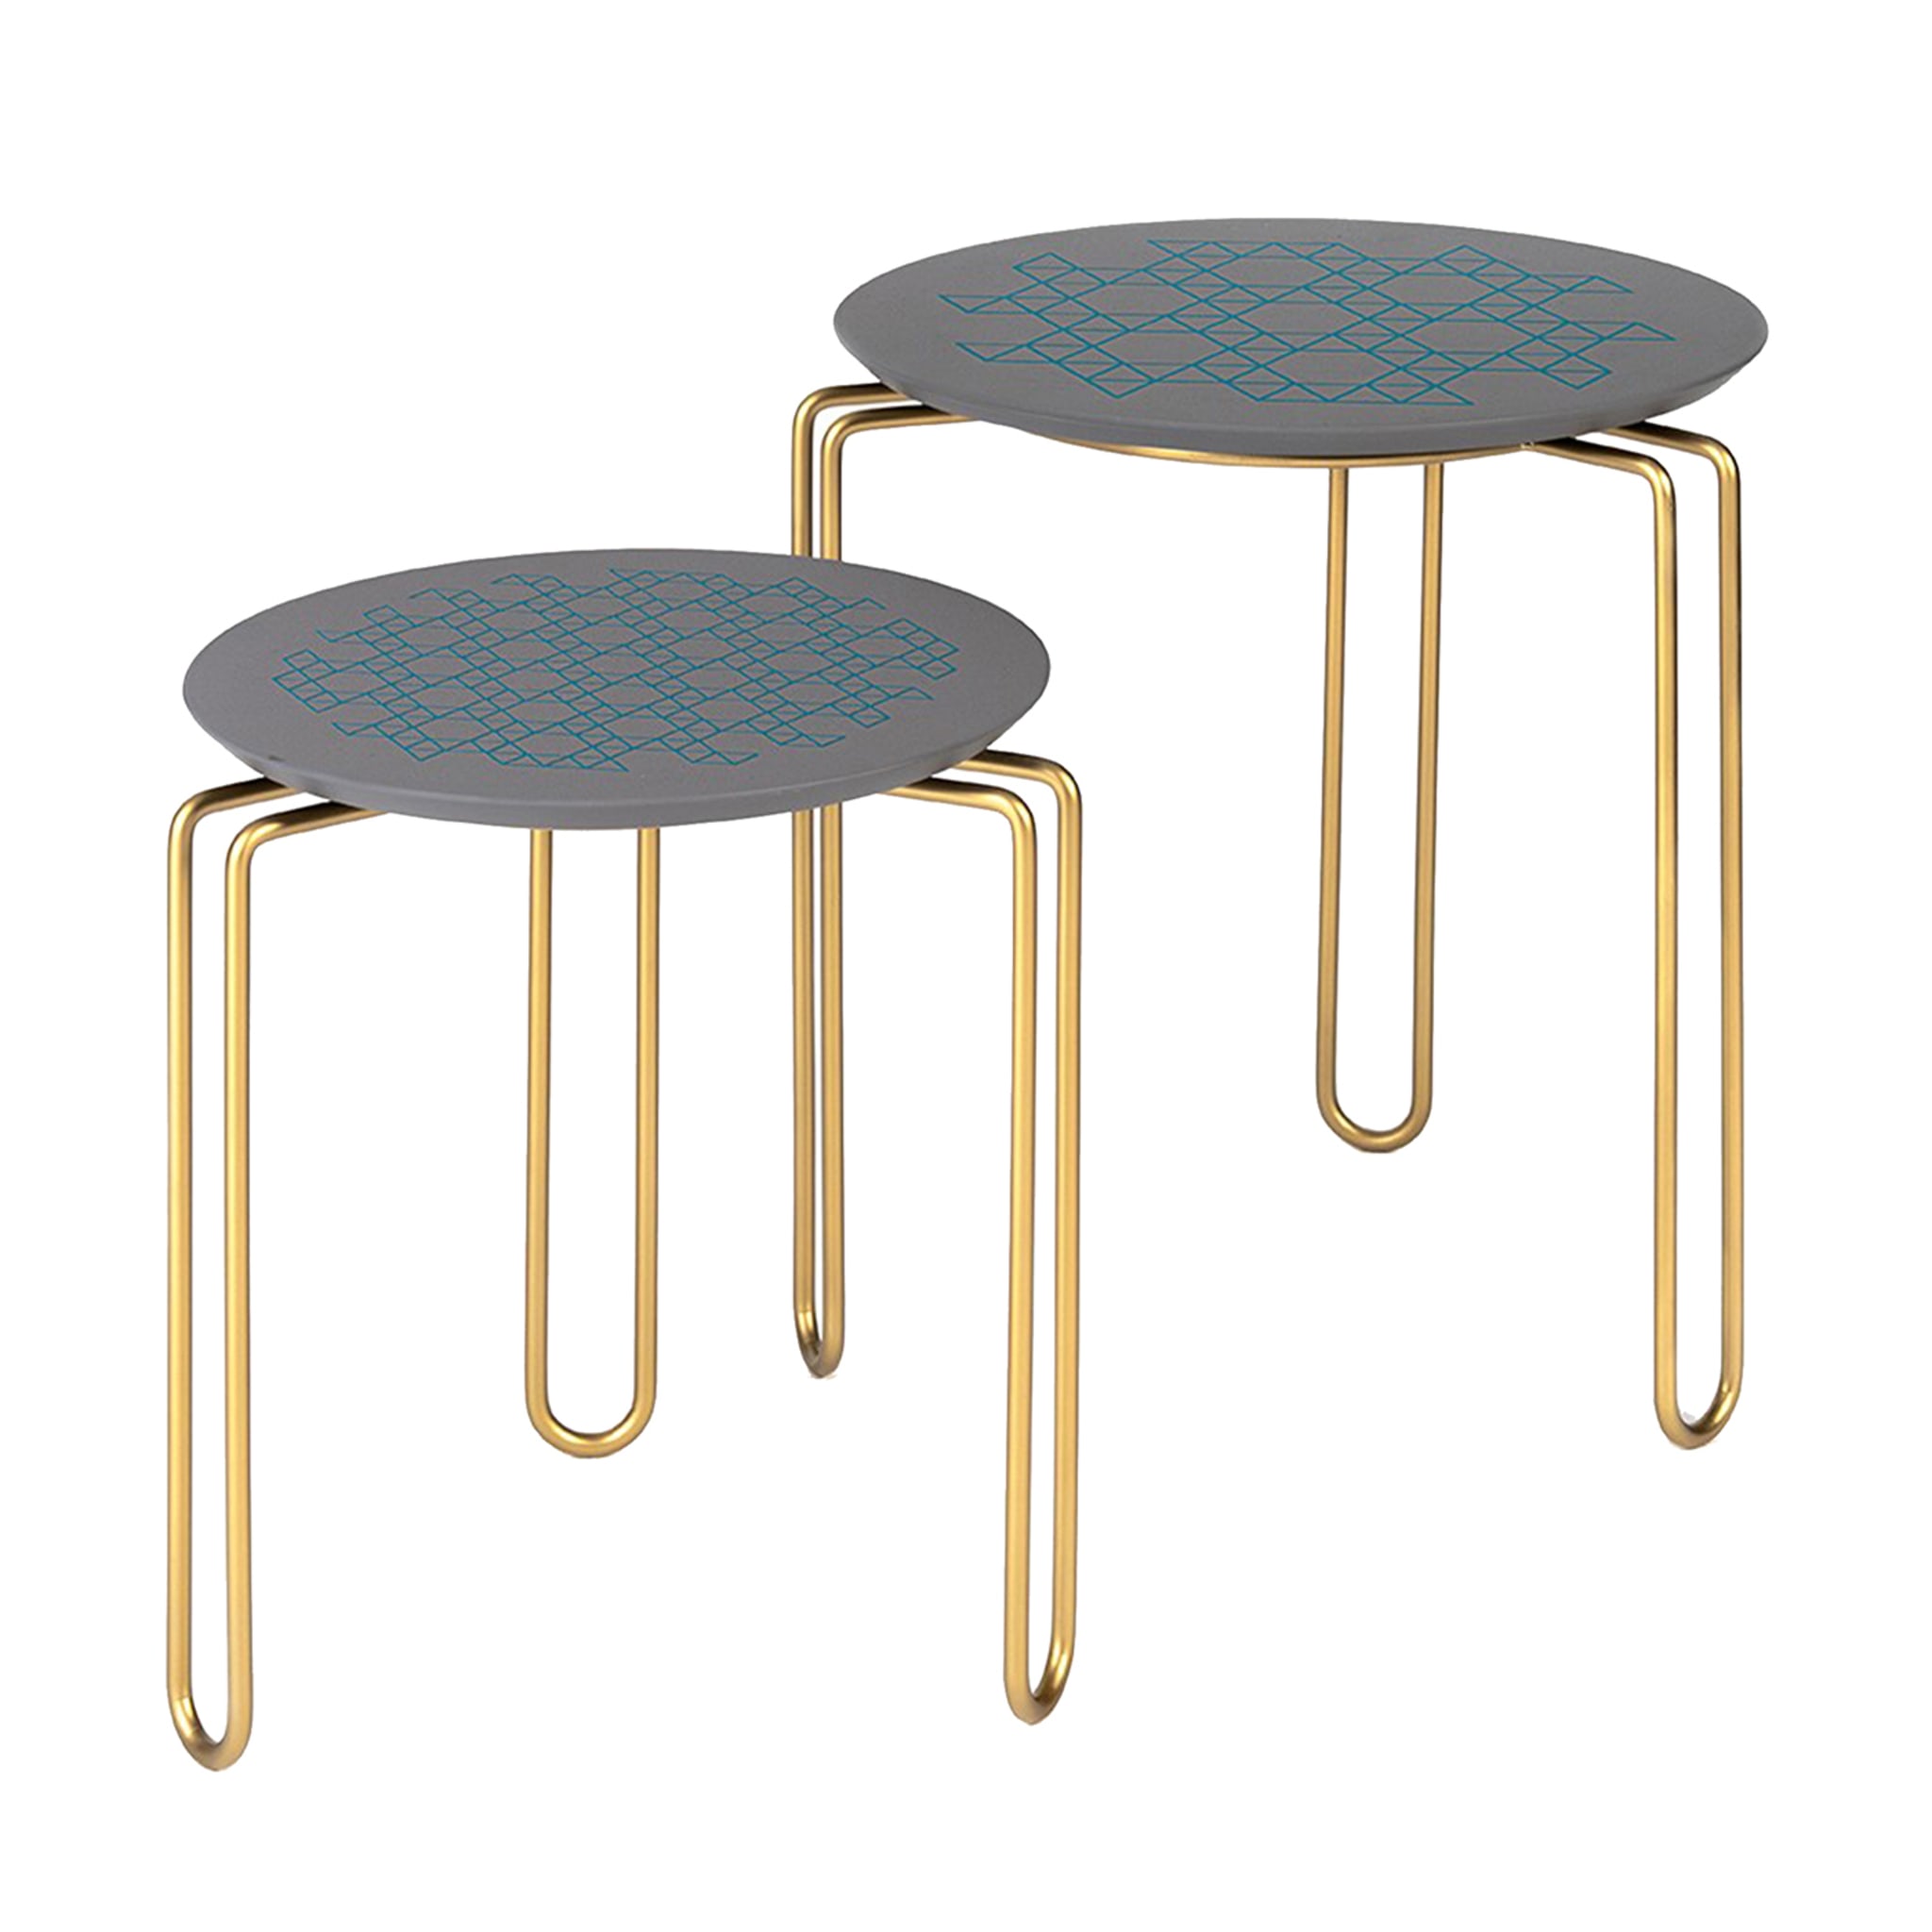 Caleido Set of 2 Gray and Brass Side Tables - Main view